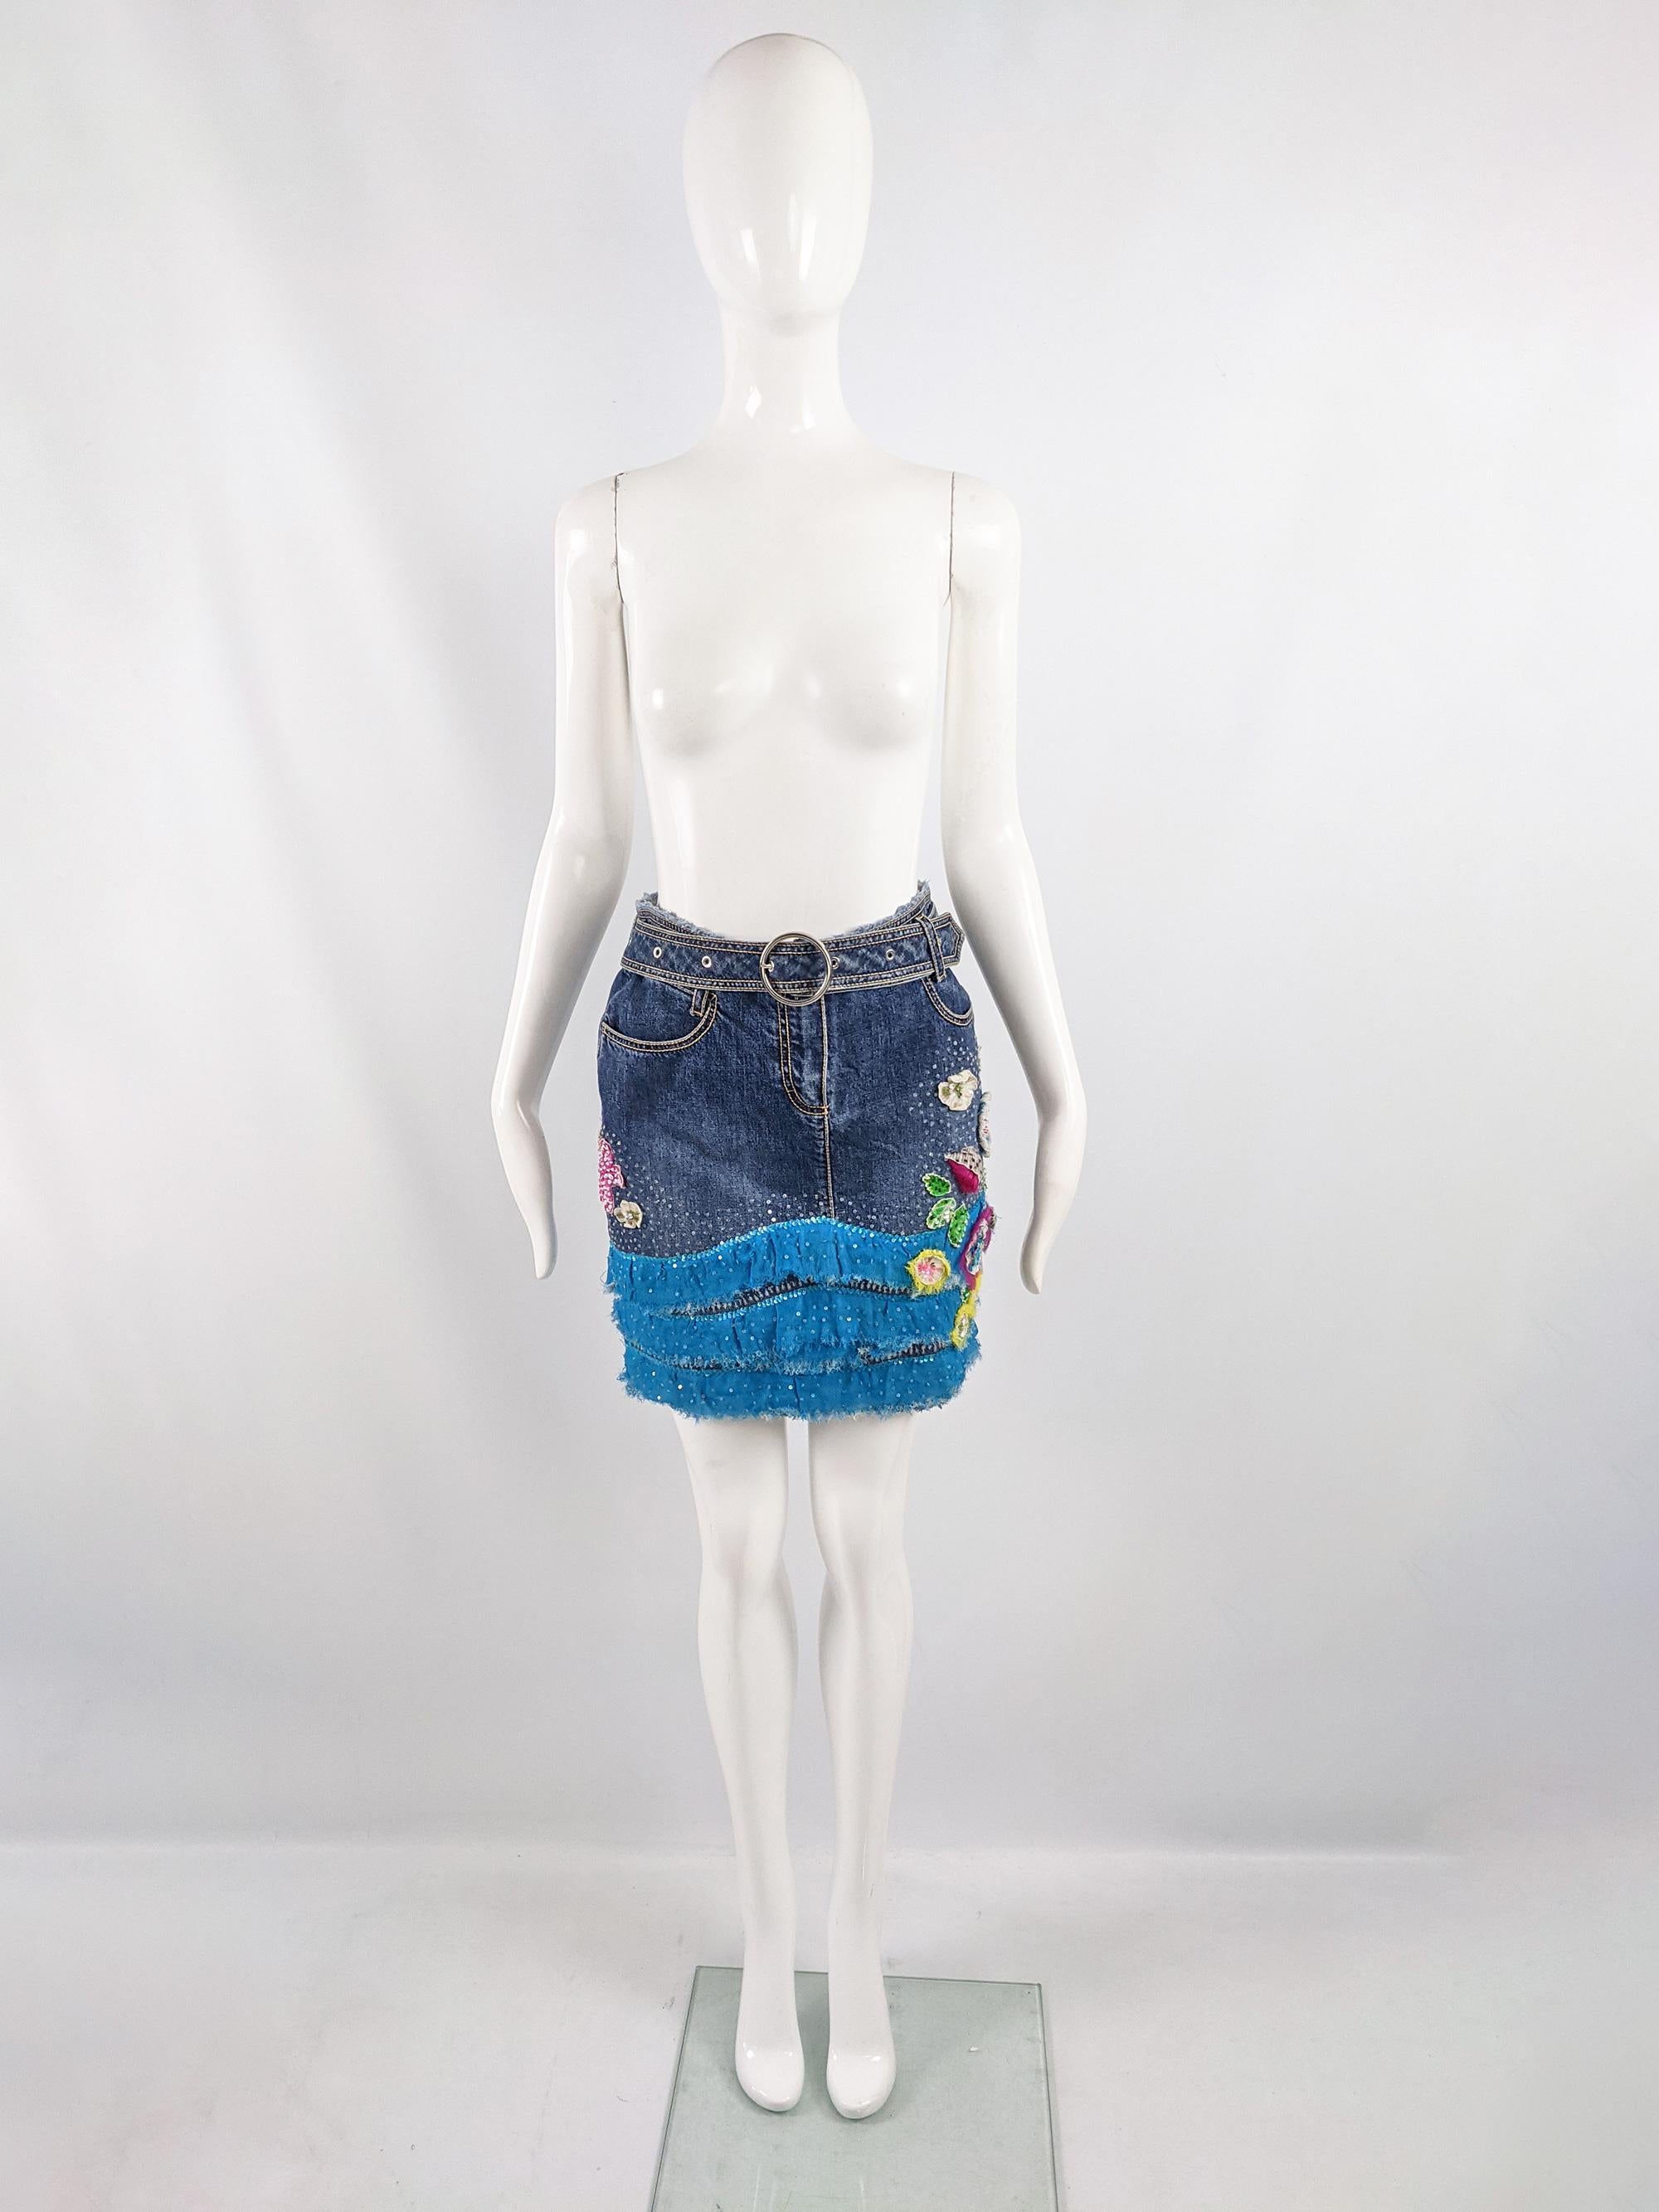 A cute vintage y2k womens mini skirt from the early 2000s by luxury fashion house, Escada. In a blue denim with a large matching belt with circular belt buckle, distressed chiffon tiered trim at the front and sequinned 3D floral appliqués. Perfect